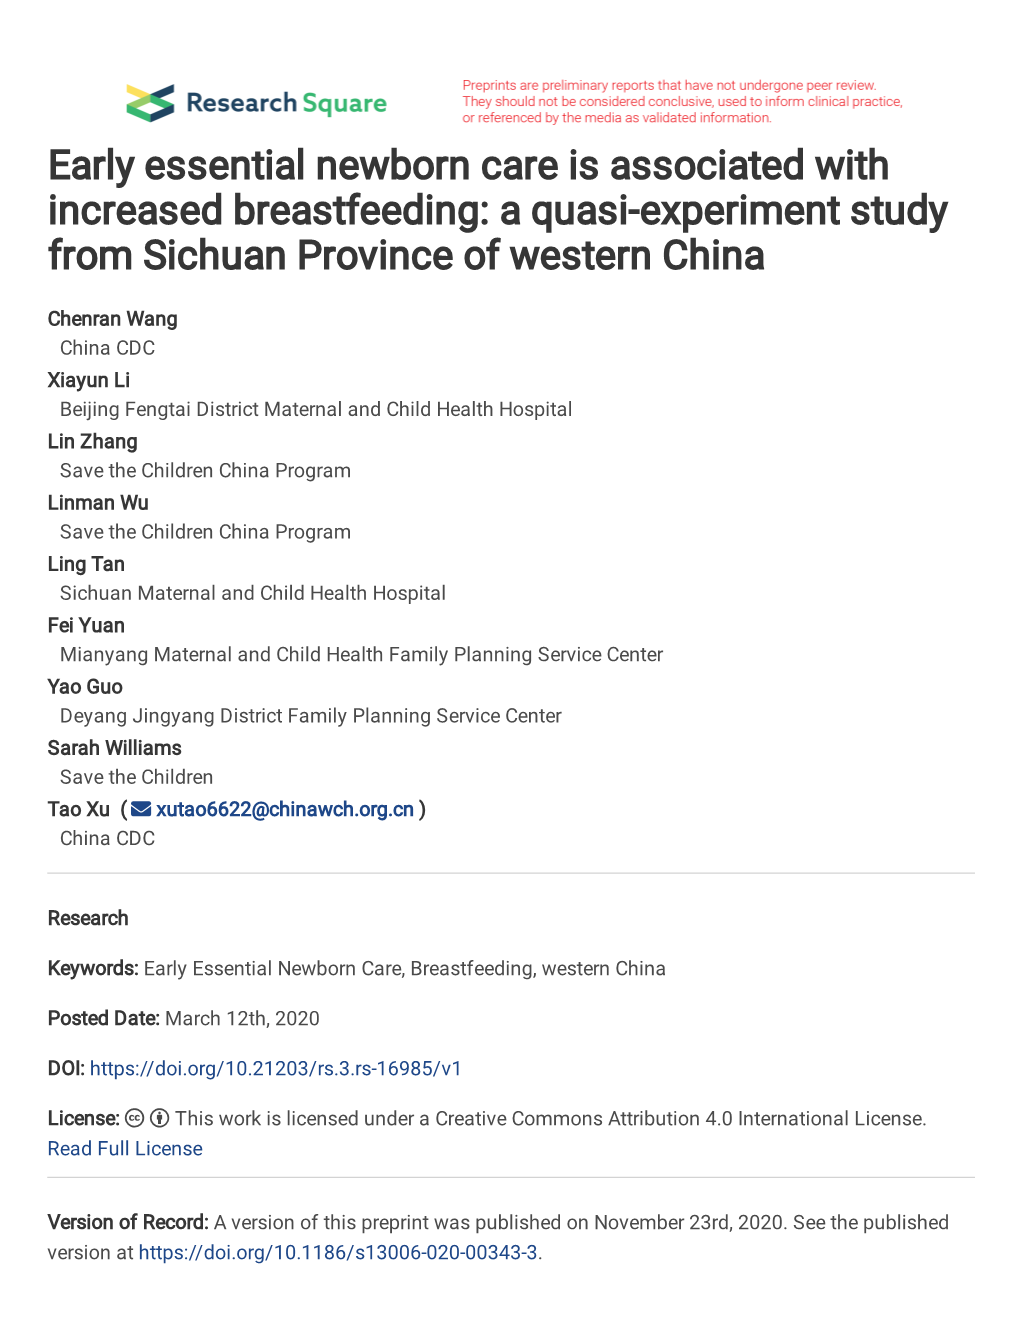 Early Essential Newborn Care Is Associated with Increased Breastfeeding: a Quasi-Experiment Study from Sichuan Province of Western China